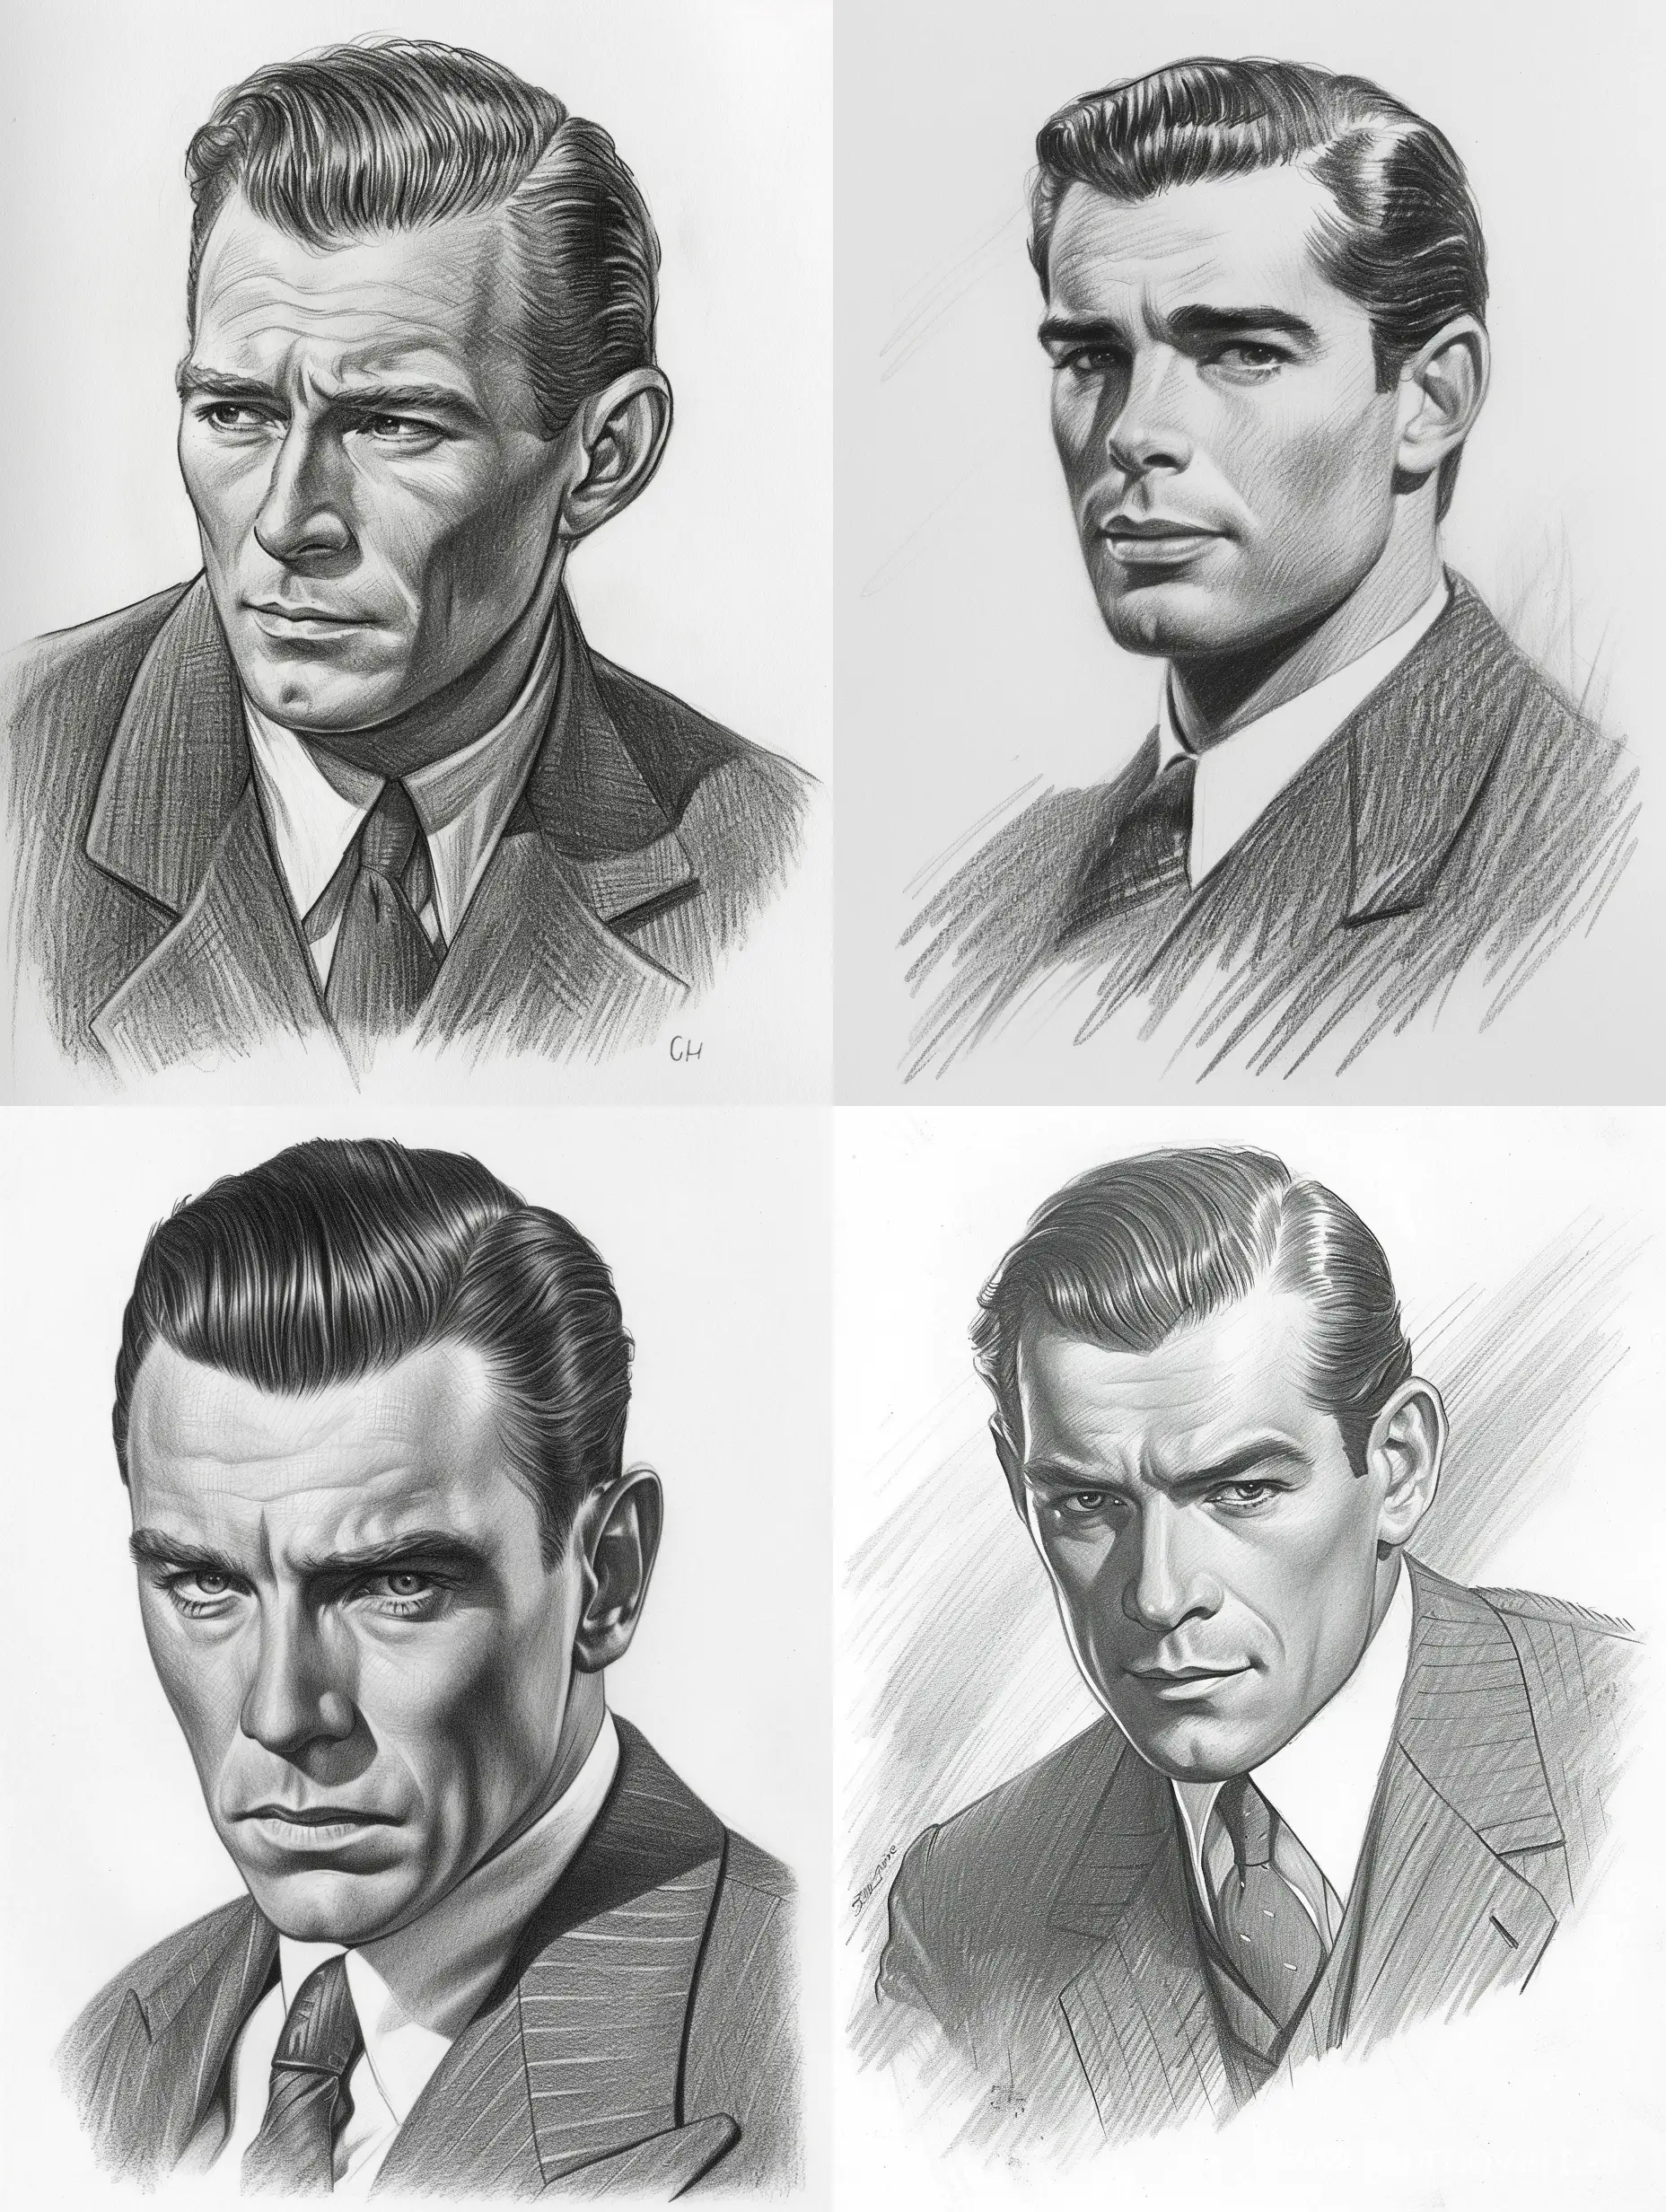 Pencil drawing of Handsome 1940s spy man, narrow face, wearing a suit, with slicked-back hair